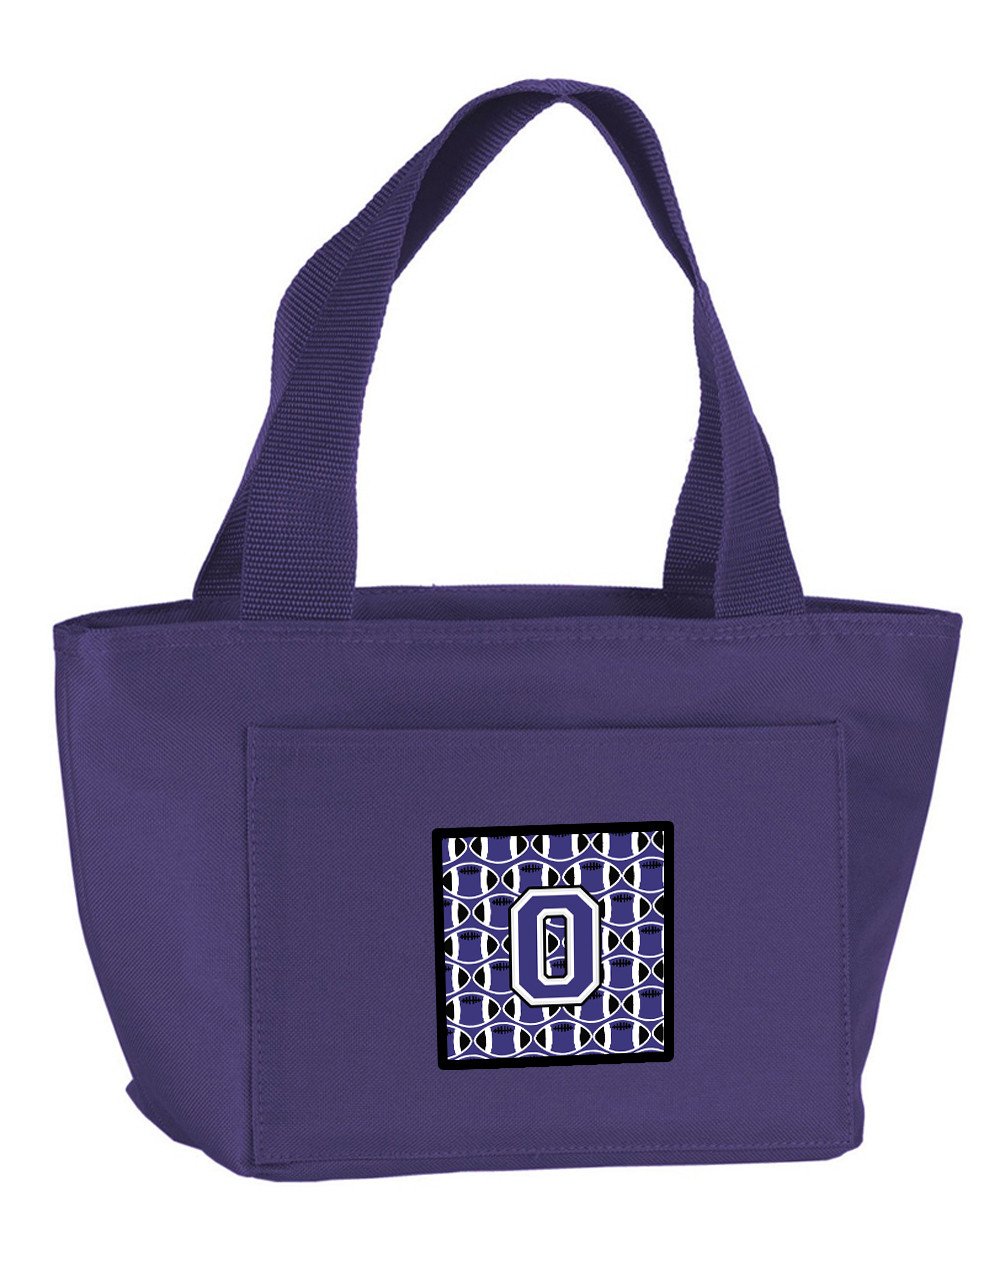 Letter O Football Purple and White Lunch Bag CJ1068-OPR-8808 by Caroline's Treasures